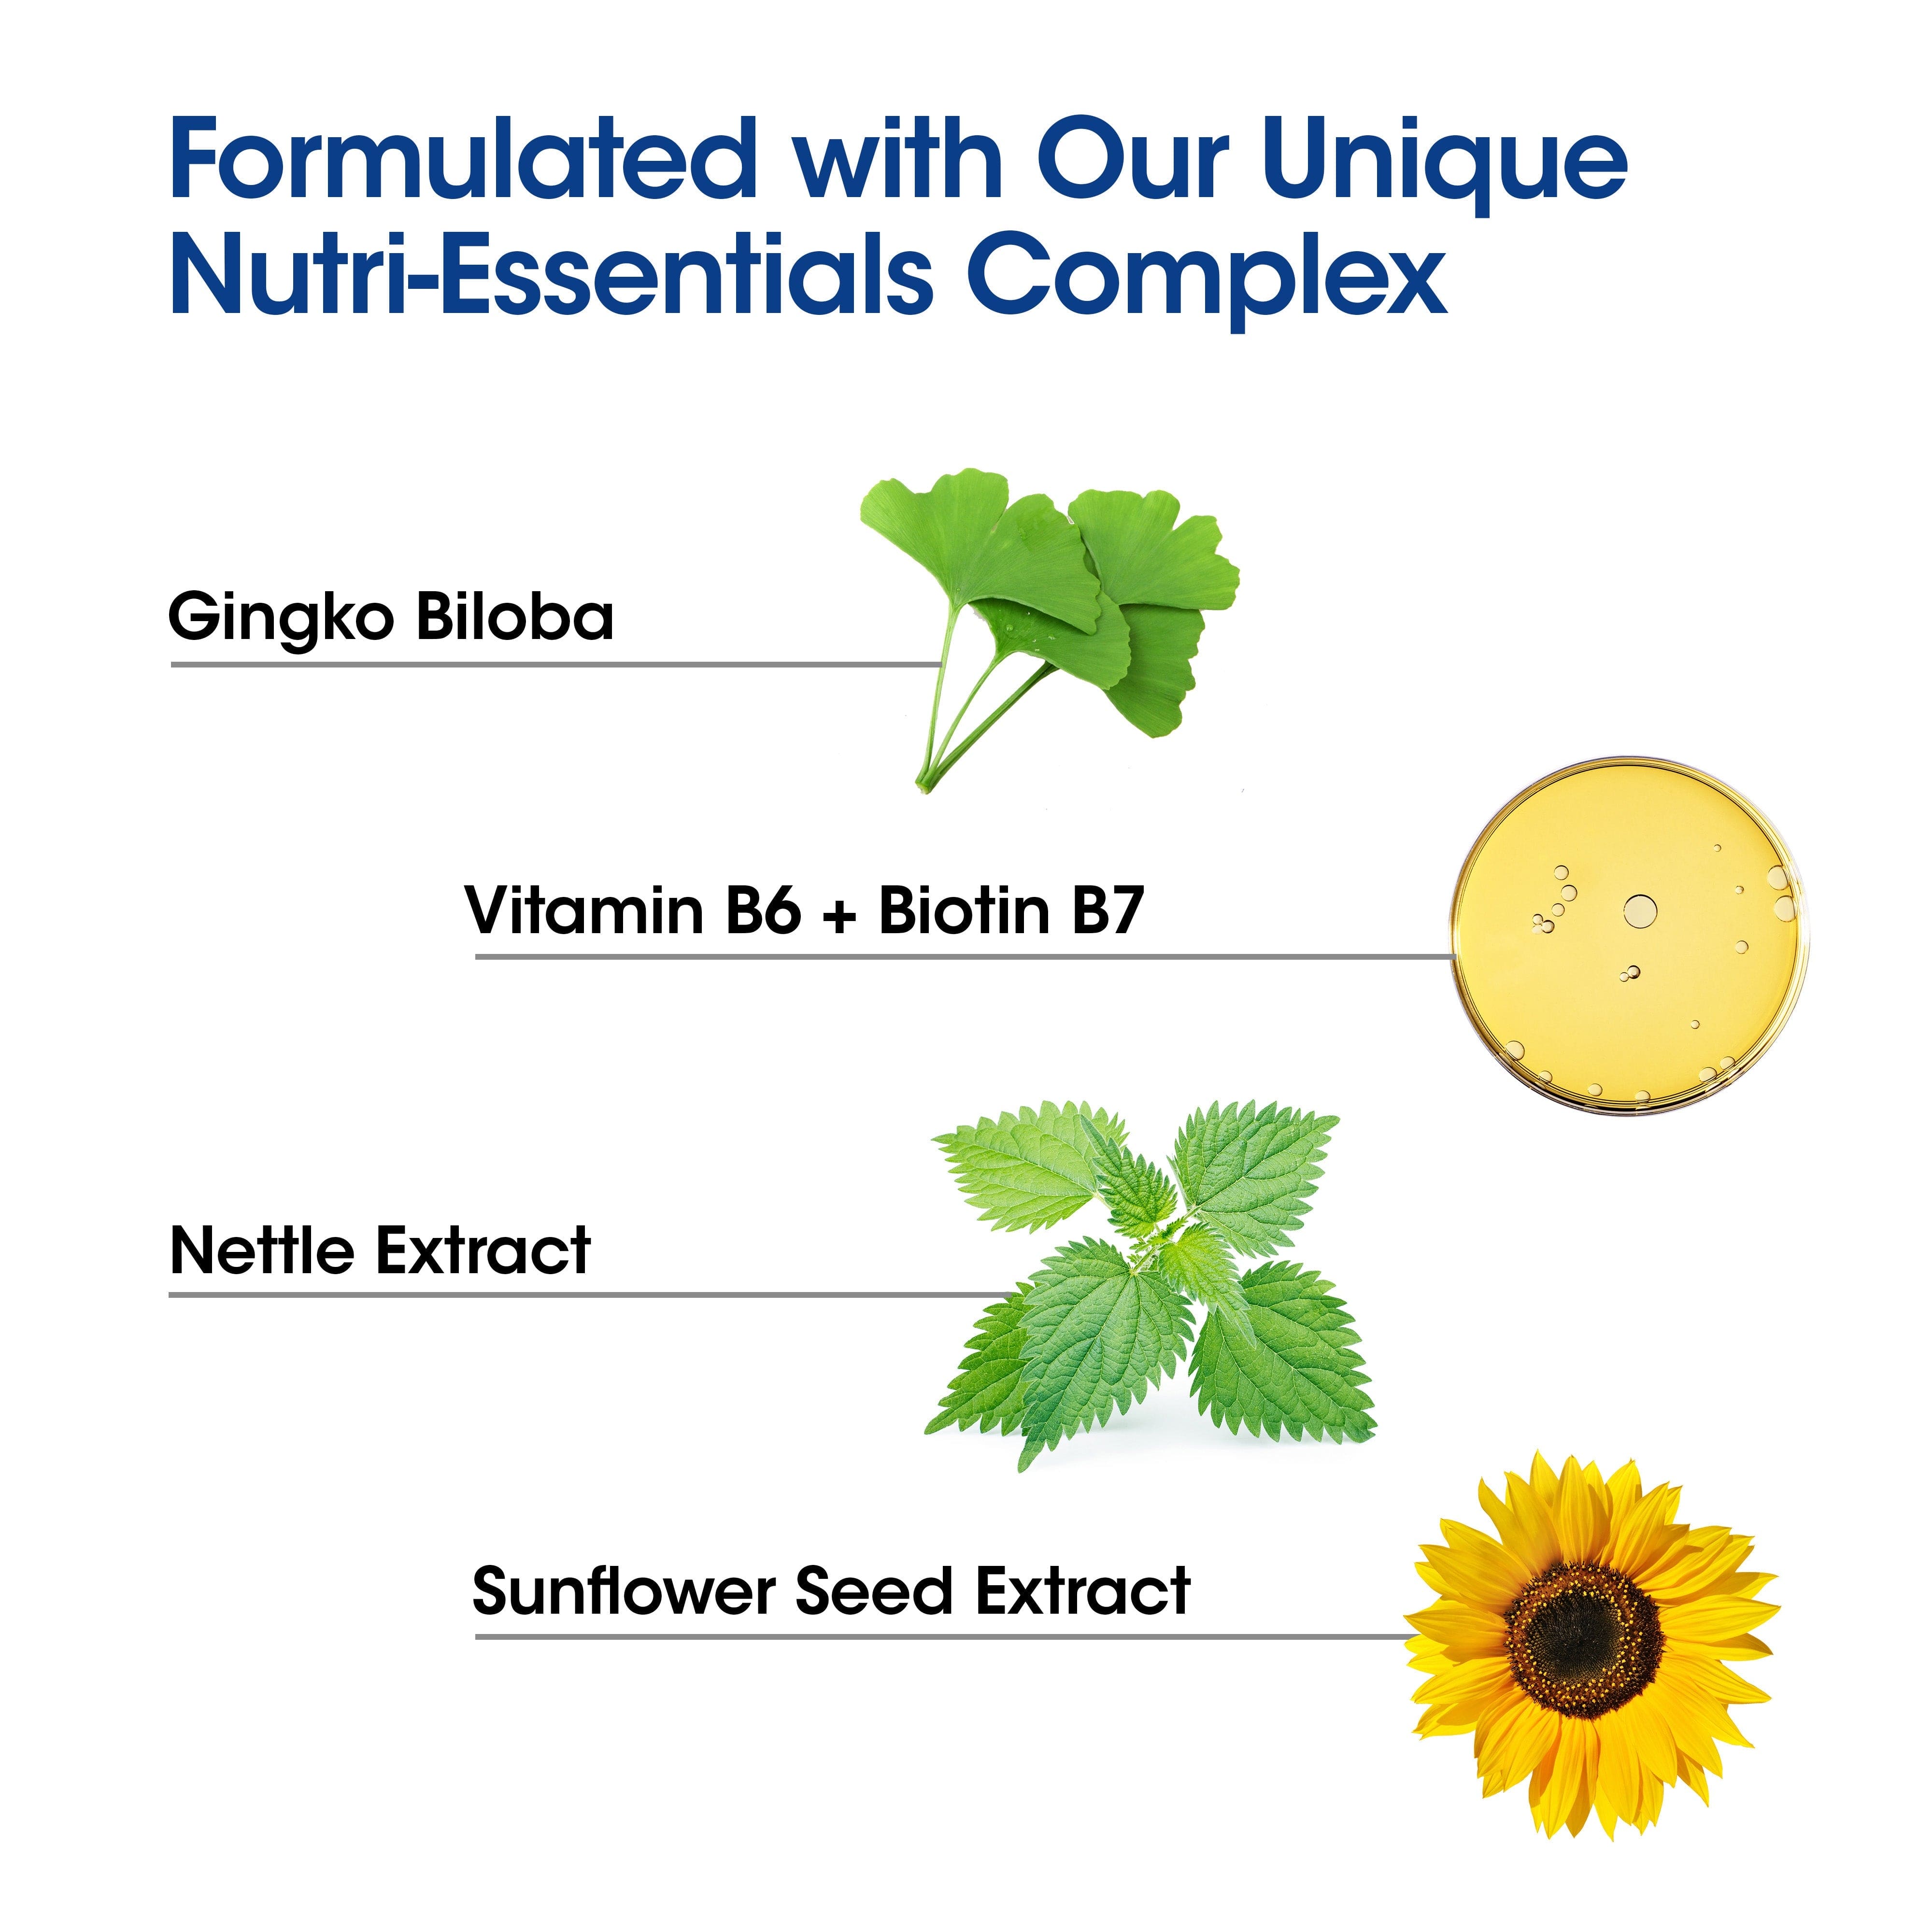 Four essential ingredients: Gingko biloba, vitamin B6 + B7, nettle extract, sunflower seed extract.